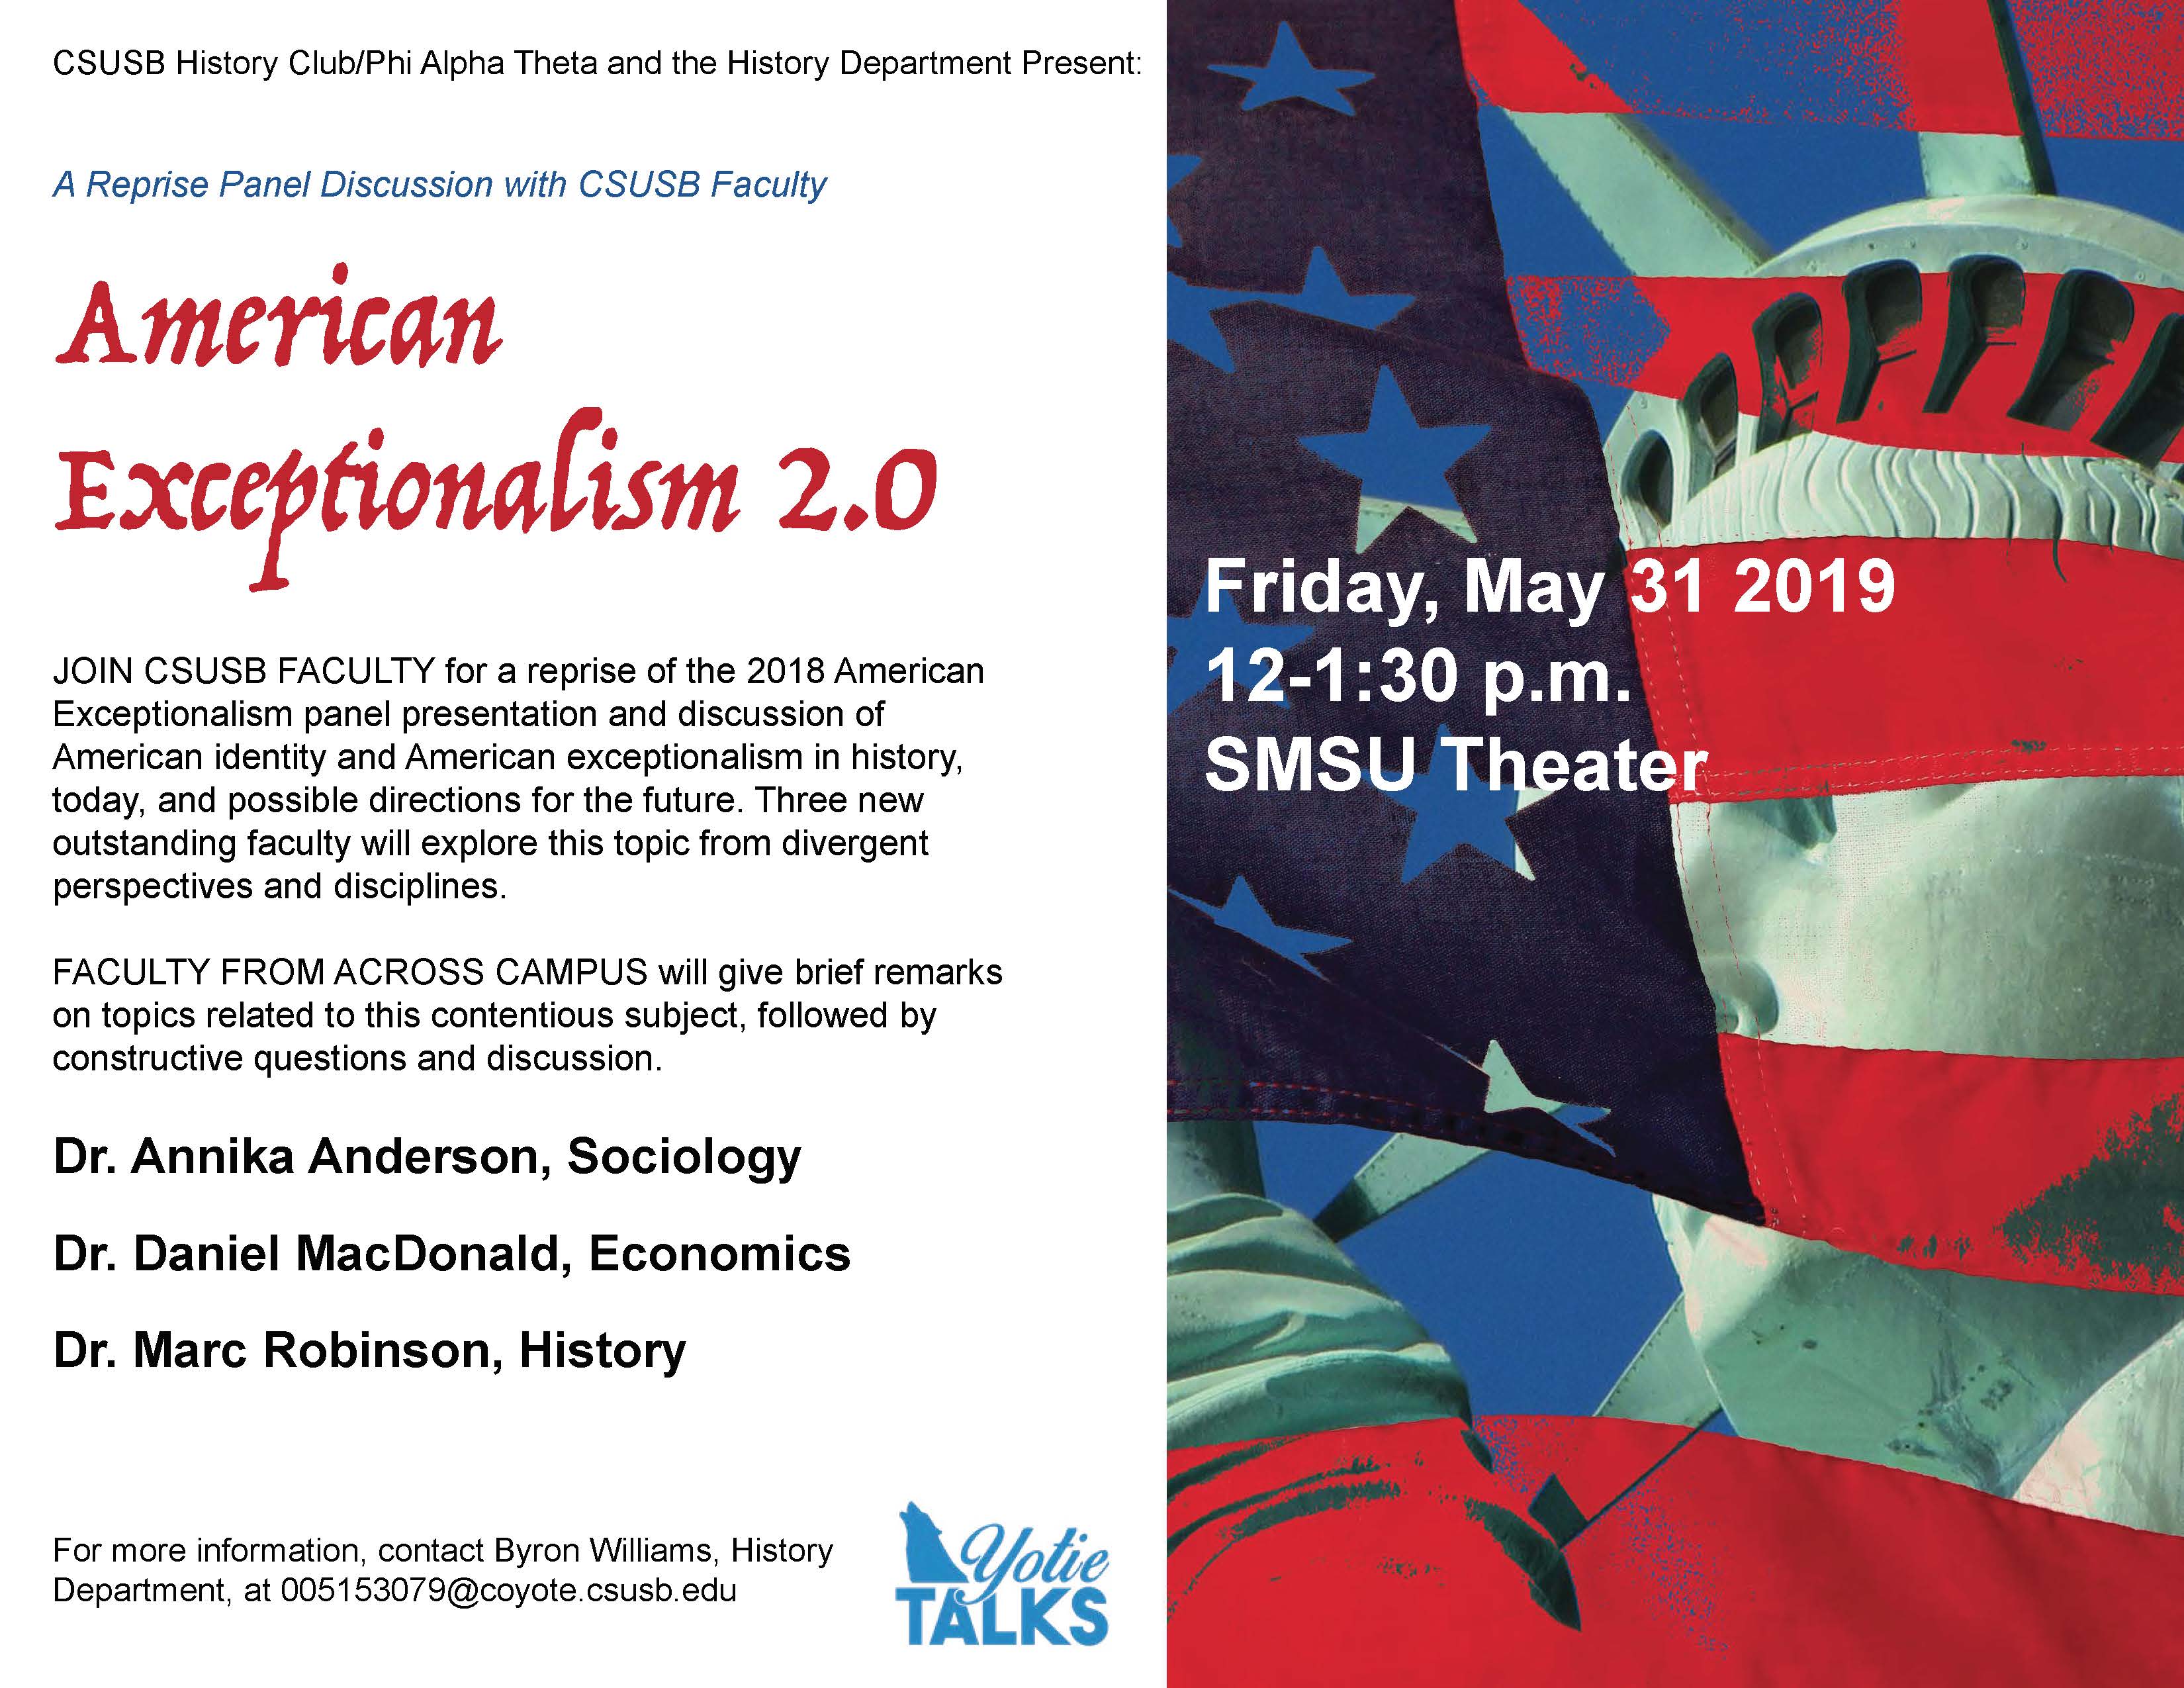 CSUSB’s Yotie Talks series revisits topic of American exceptionalism